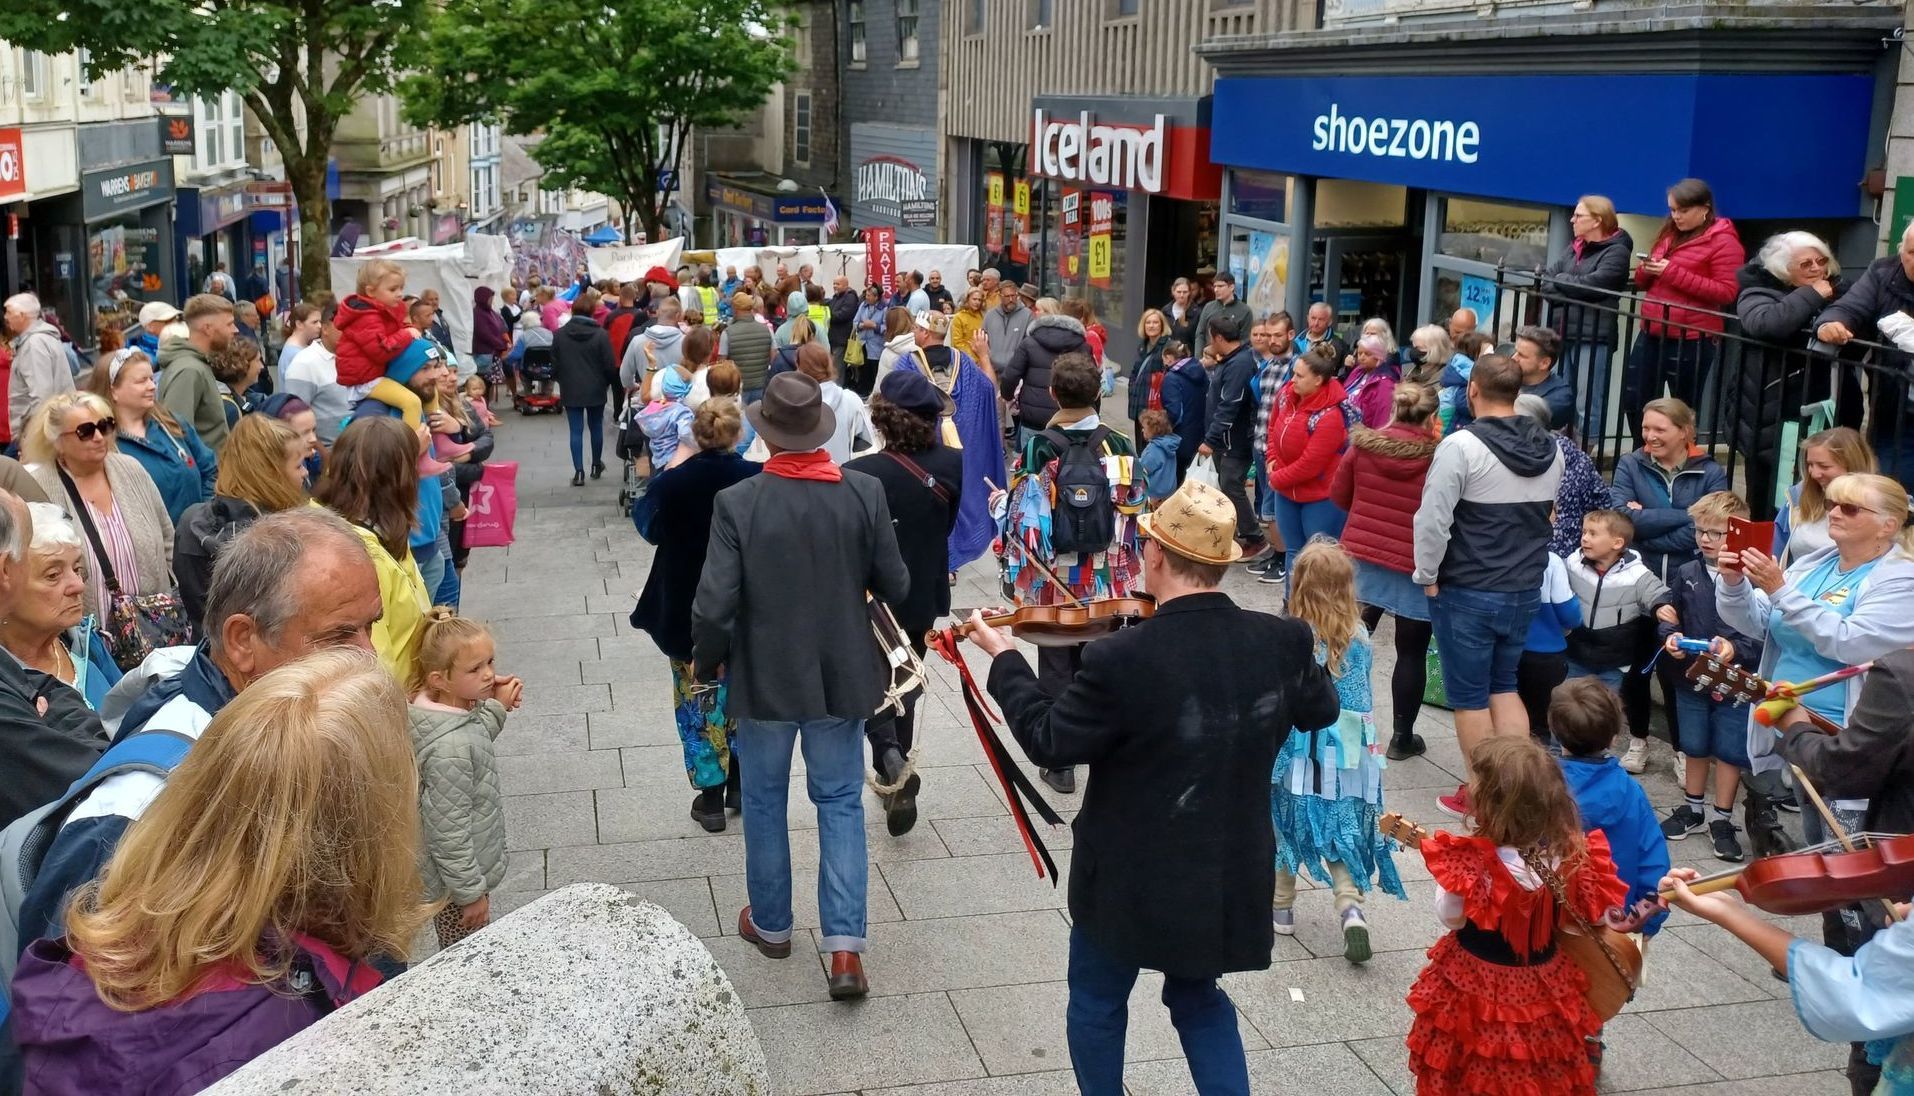 The parade makes its way through the town centre Picture: Alice Lamming